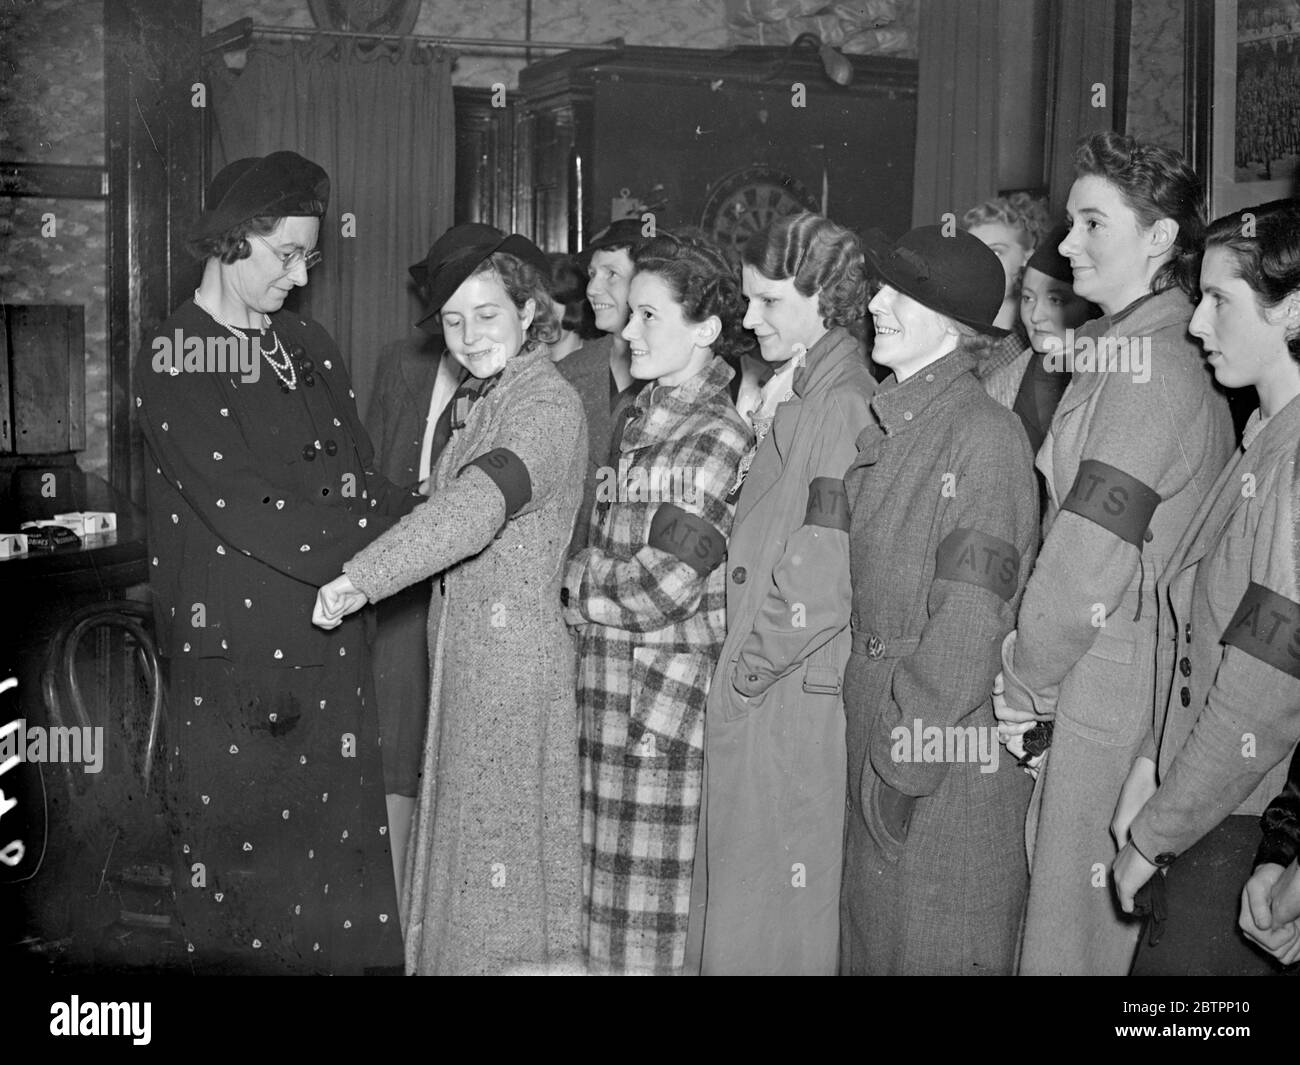 The WATS on parade. Recruits are now being enrolled for the Women's Auxiliary Territorial Service, brought into being during the recent crisis and now to be organised on the same basis as the territorial Army. Members will be used for clerical duties at the various Territorial Headquarters while Special Sections will be trained for light transport and work in cook houses and canteens. Photo shows, Company Commander Mrs Dudley Harris, issuing brassards two new recruits of the 1st County of Middlesex Company, at their headquarters at Ravenscourt Park. Armbands will be worn until the new uniforms Stock Photo